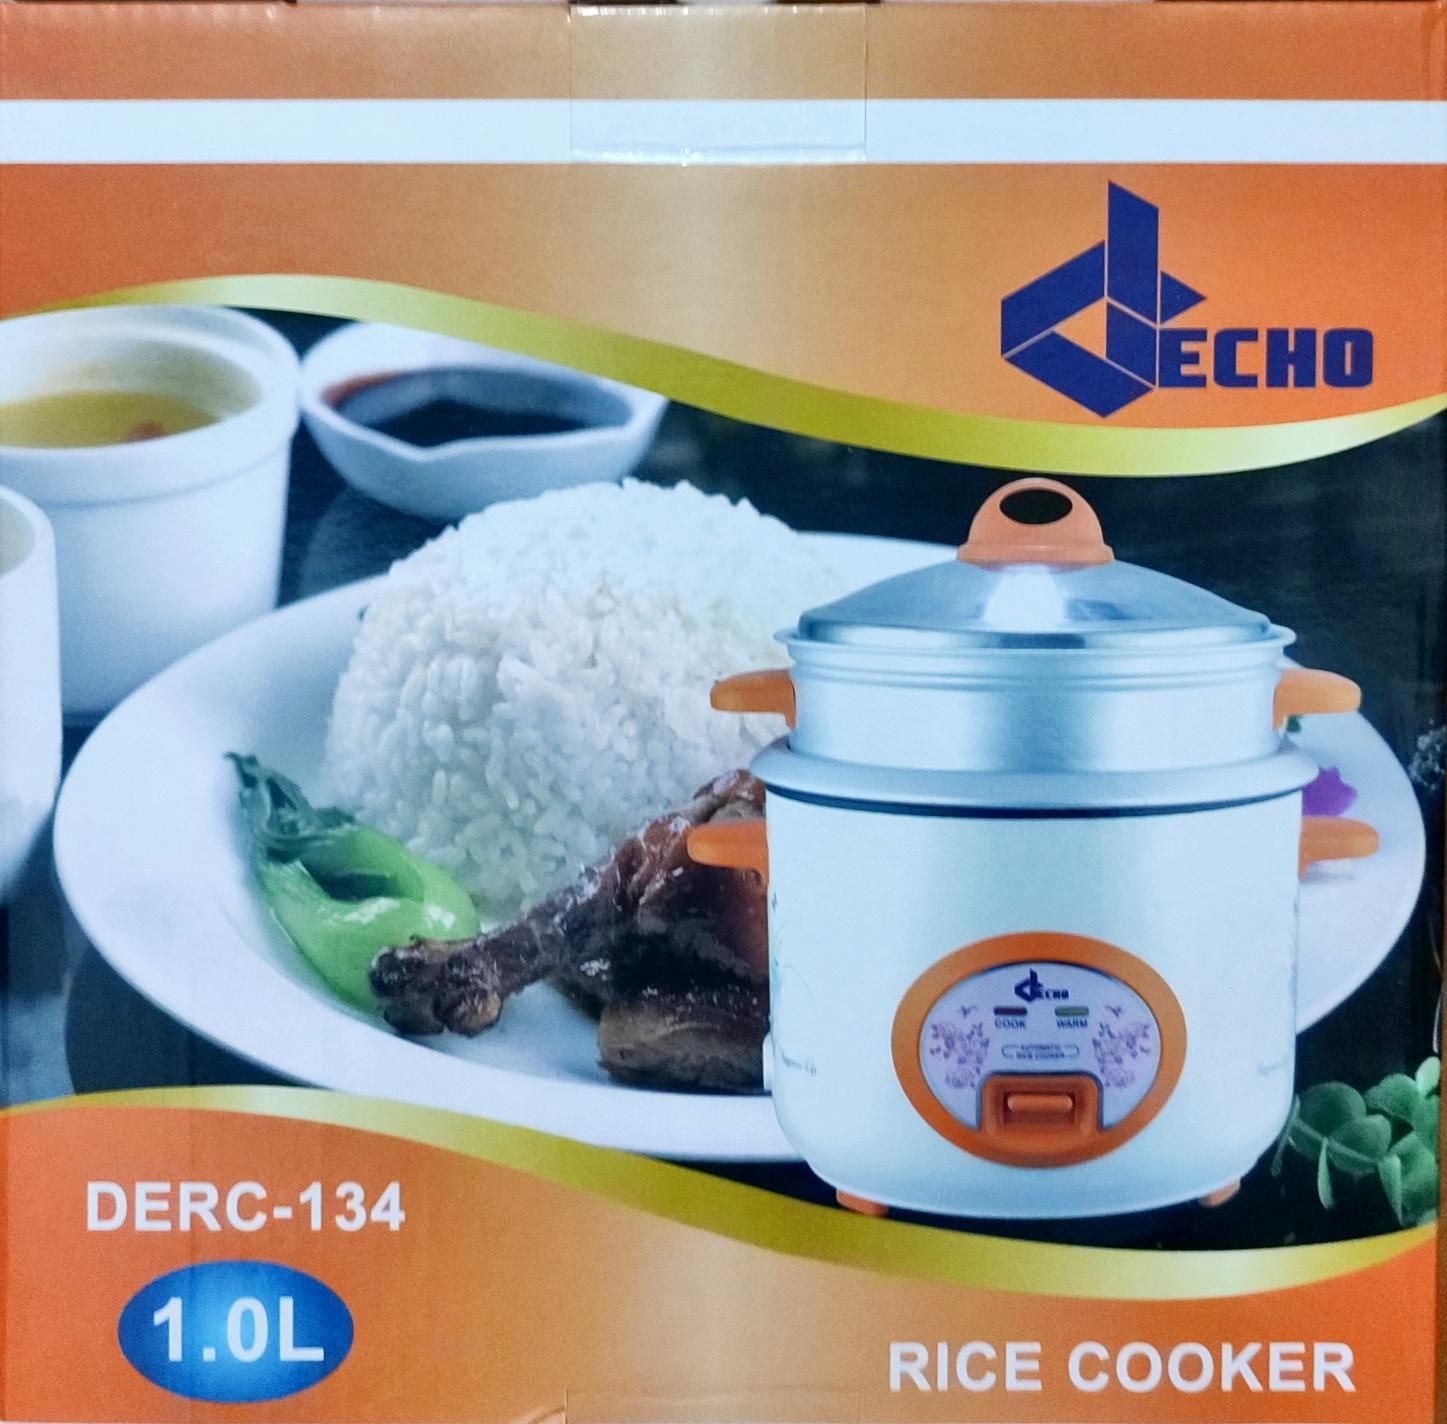 Rice Cooker Steamer With Removable Nonstick Pot 0.6L /1.0/1.2/1.8/2.2/2.8L Fast  Rice Cooker - Buy Rice Cooker Steamer With Removable Nonstick Pot 0.6L  /1.0/1.2/1.8/2.2/2.8L Fast Rice Cooker Product on